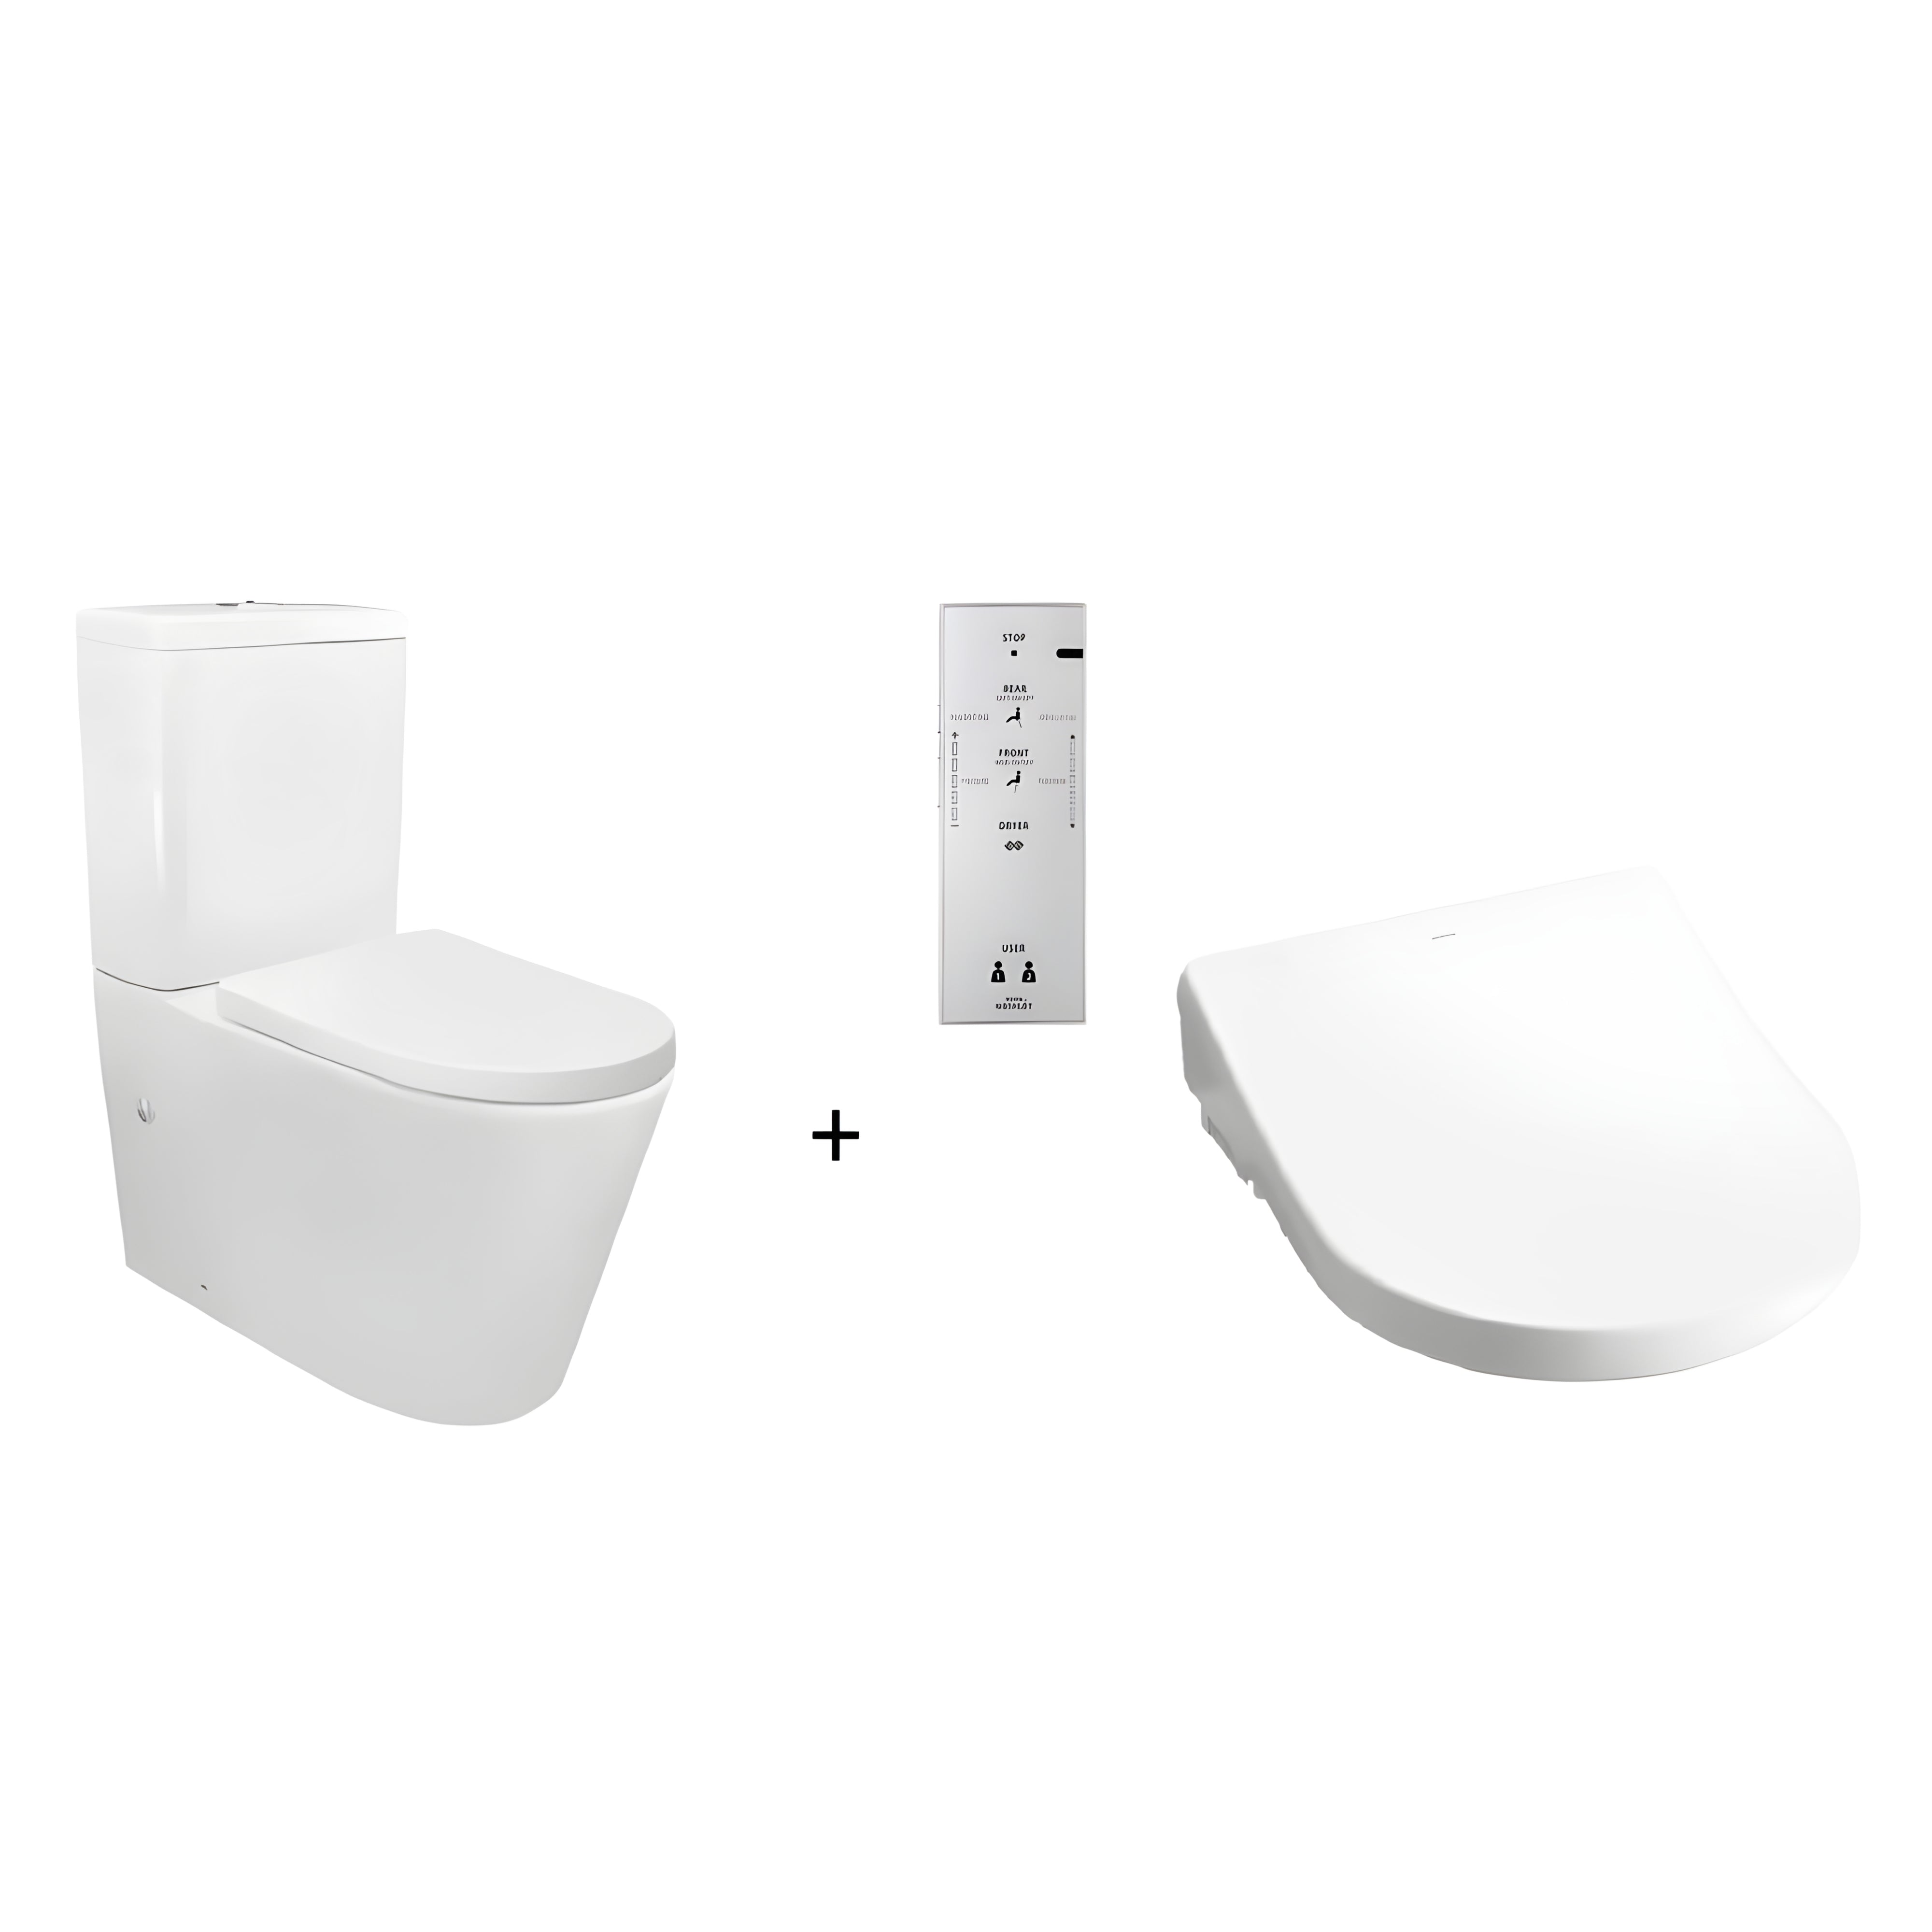 TOTO WASHLET W/ REMOTE CONTROL AND AUTOLID TORNADO TOILET SUITE PACKAGE D-SHAPE GLOSS WHITE